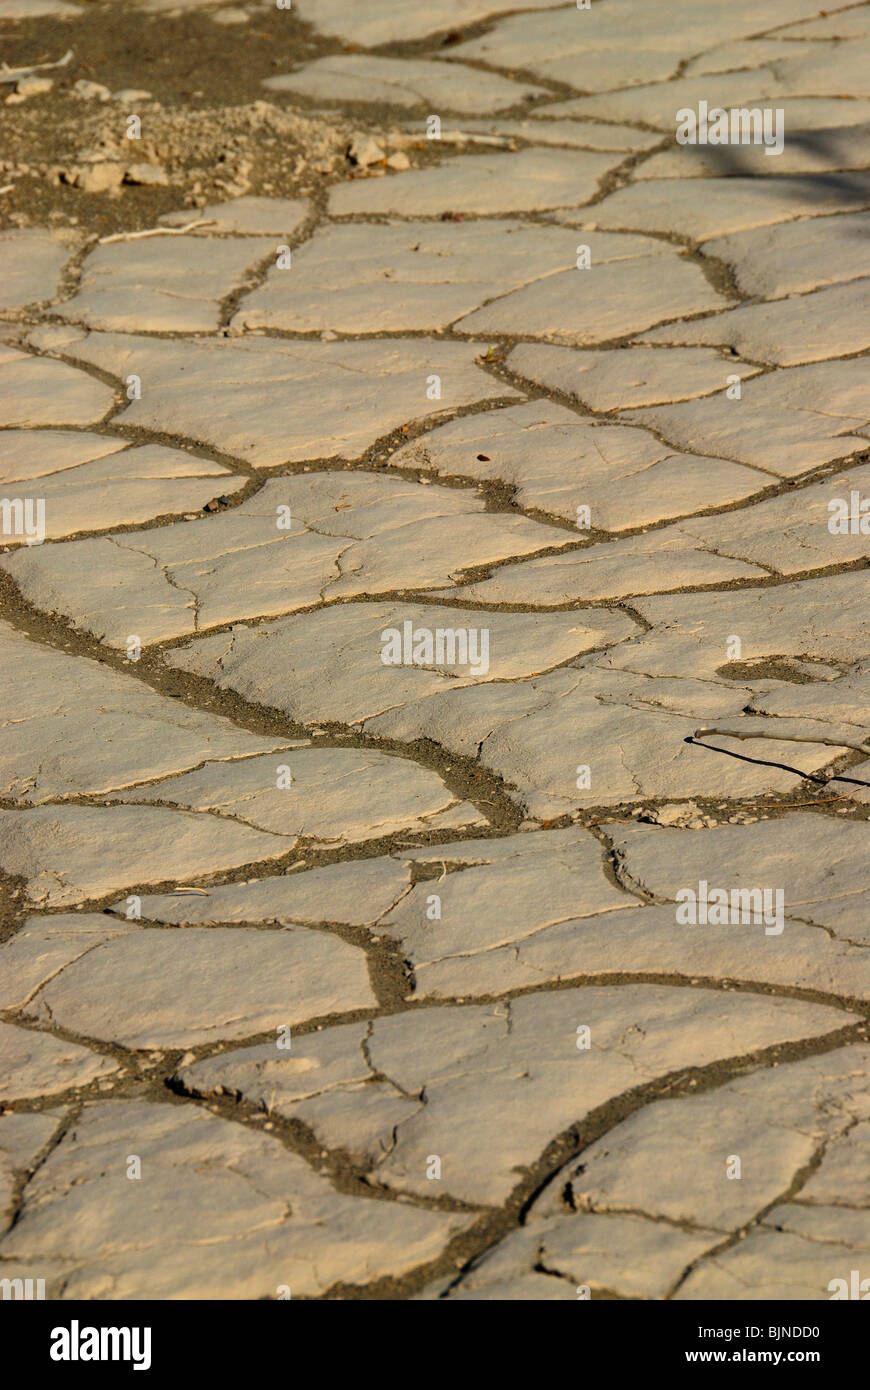 Dry soil in Mesquite sand Dunes in Death Valley, California state Stock Photo